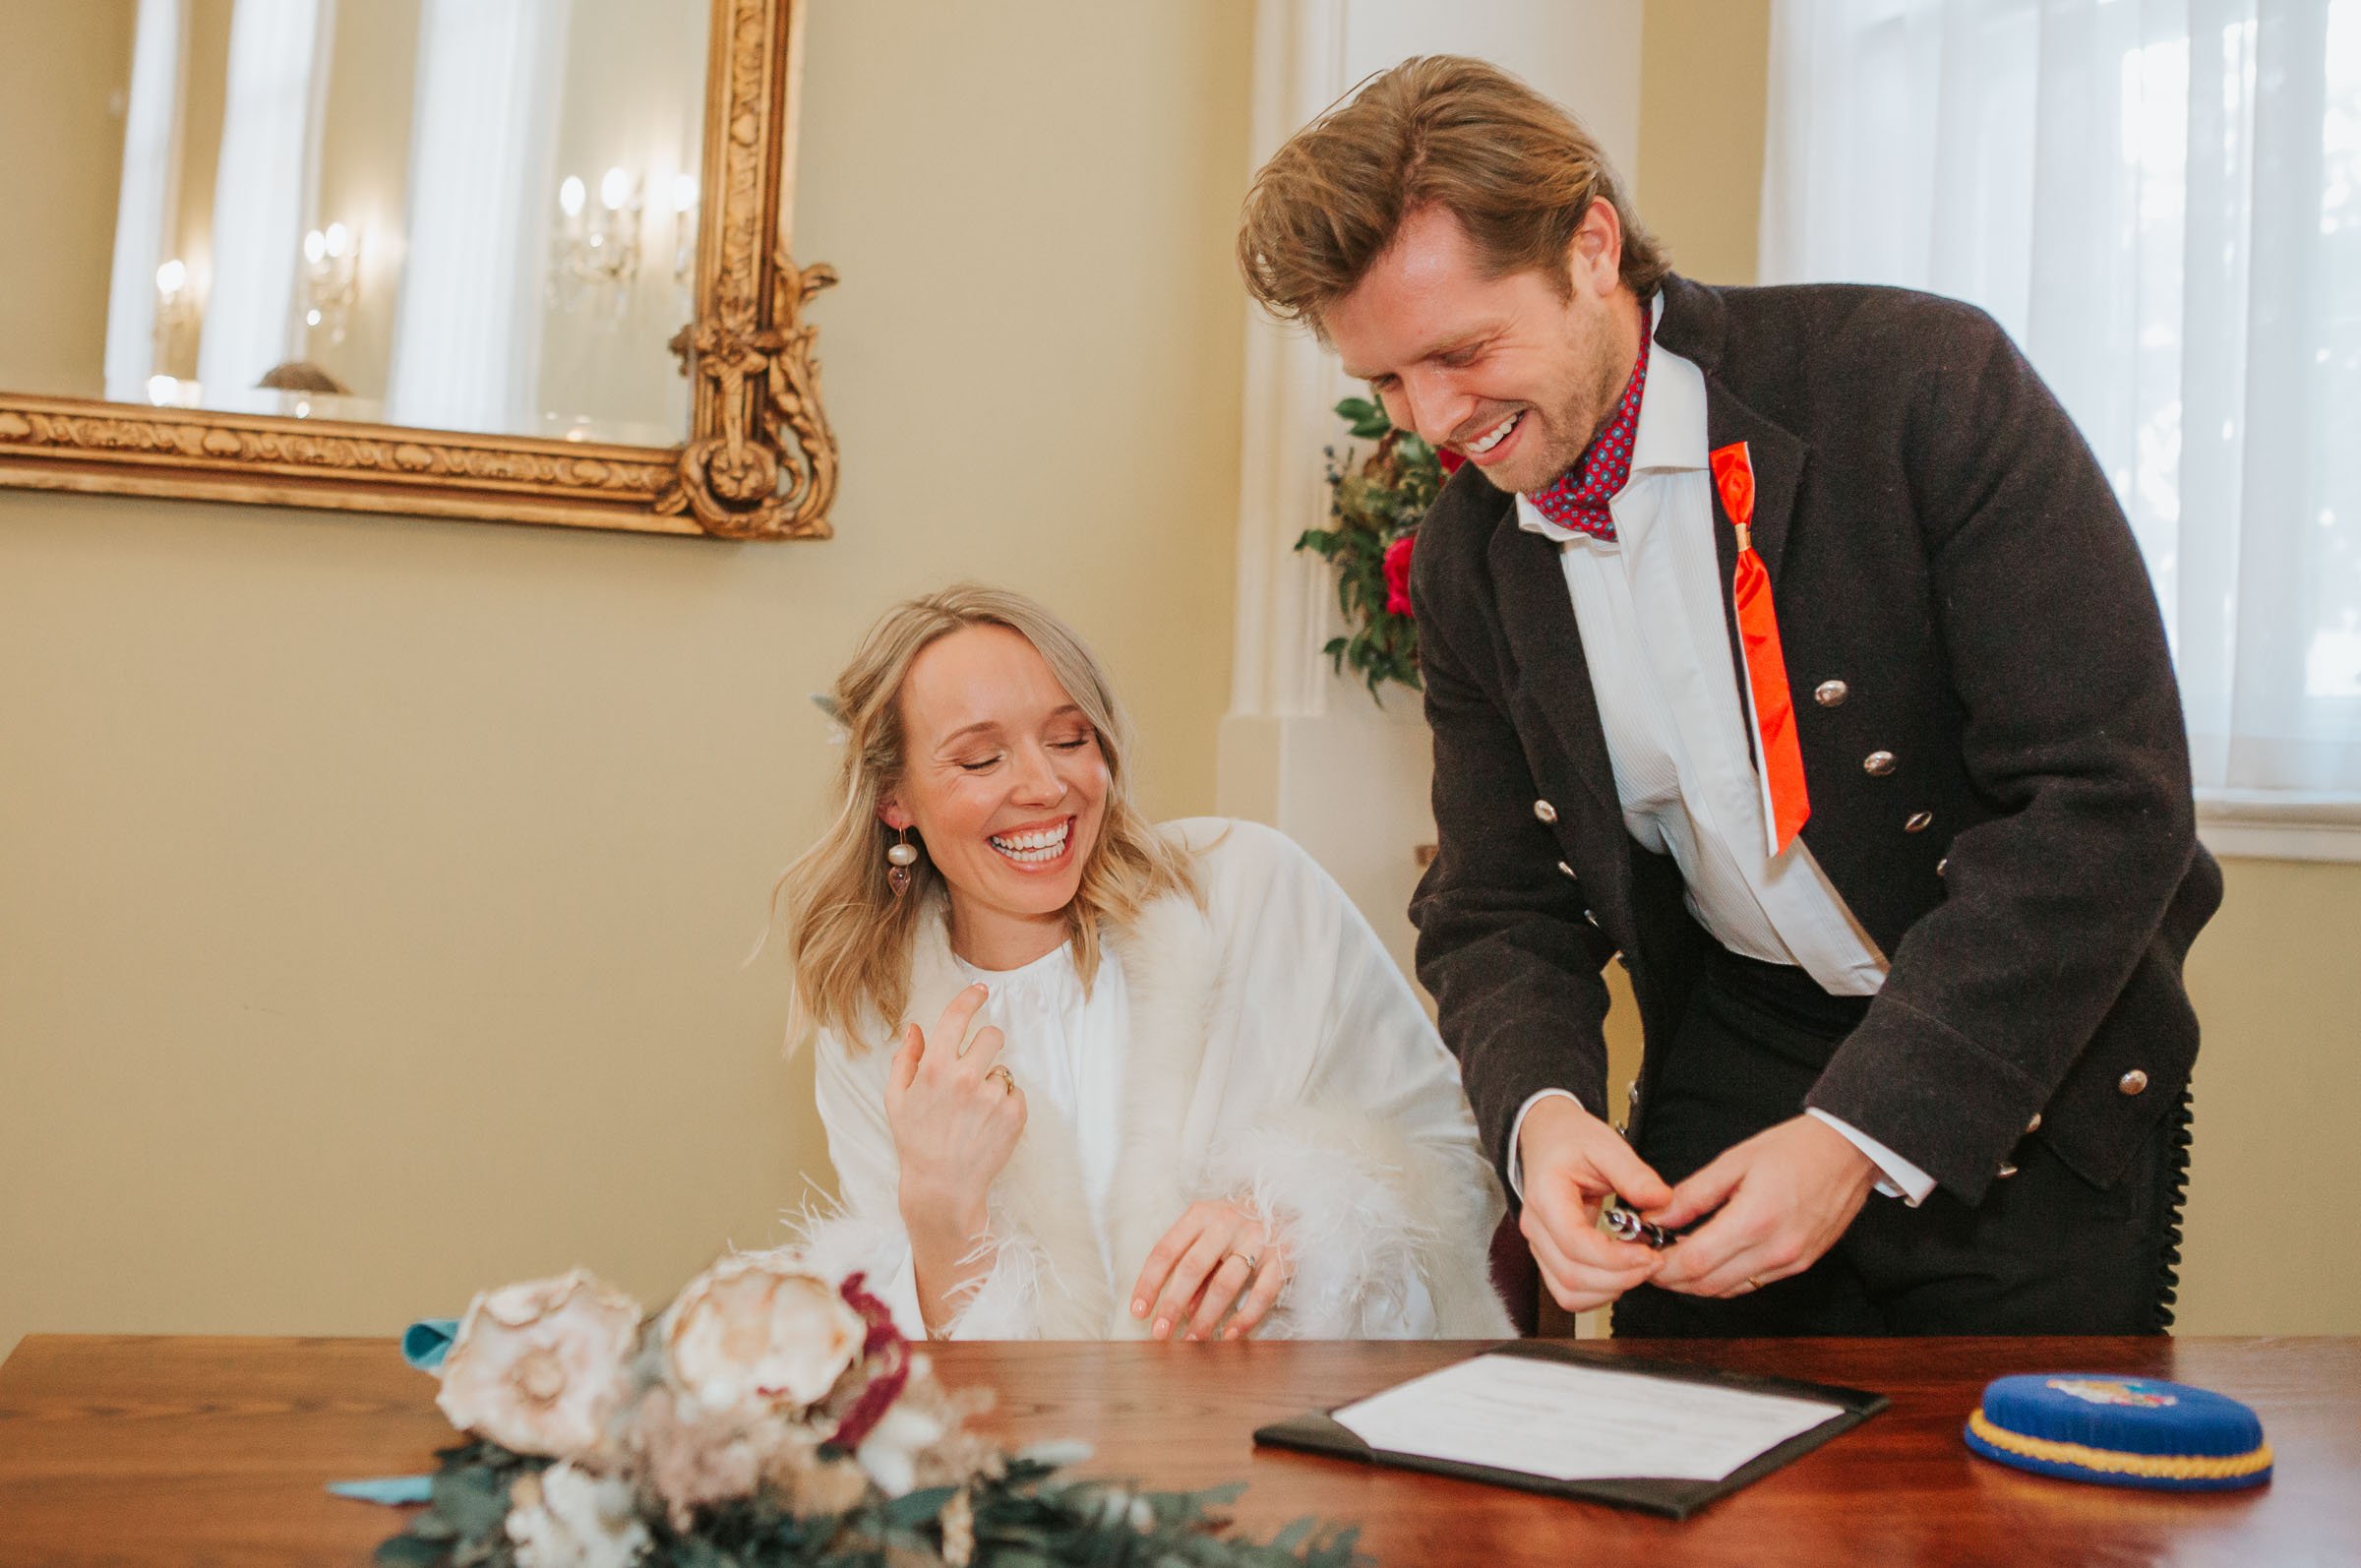  Lizzie and Max signing the register in front of their friends and family in The Byron Room at Chelsea Old Town Hall.  